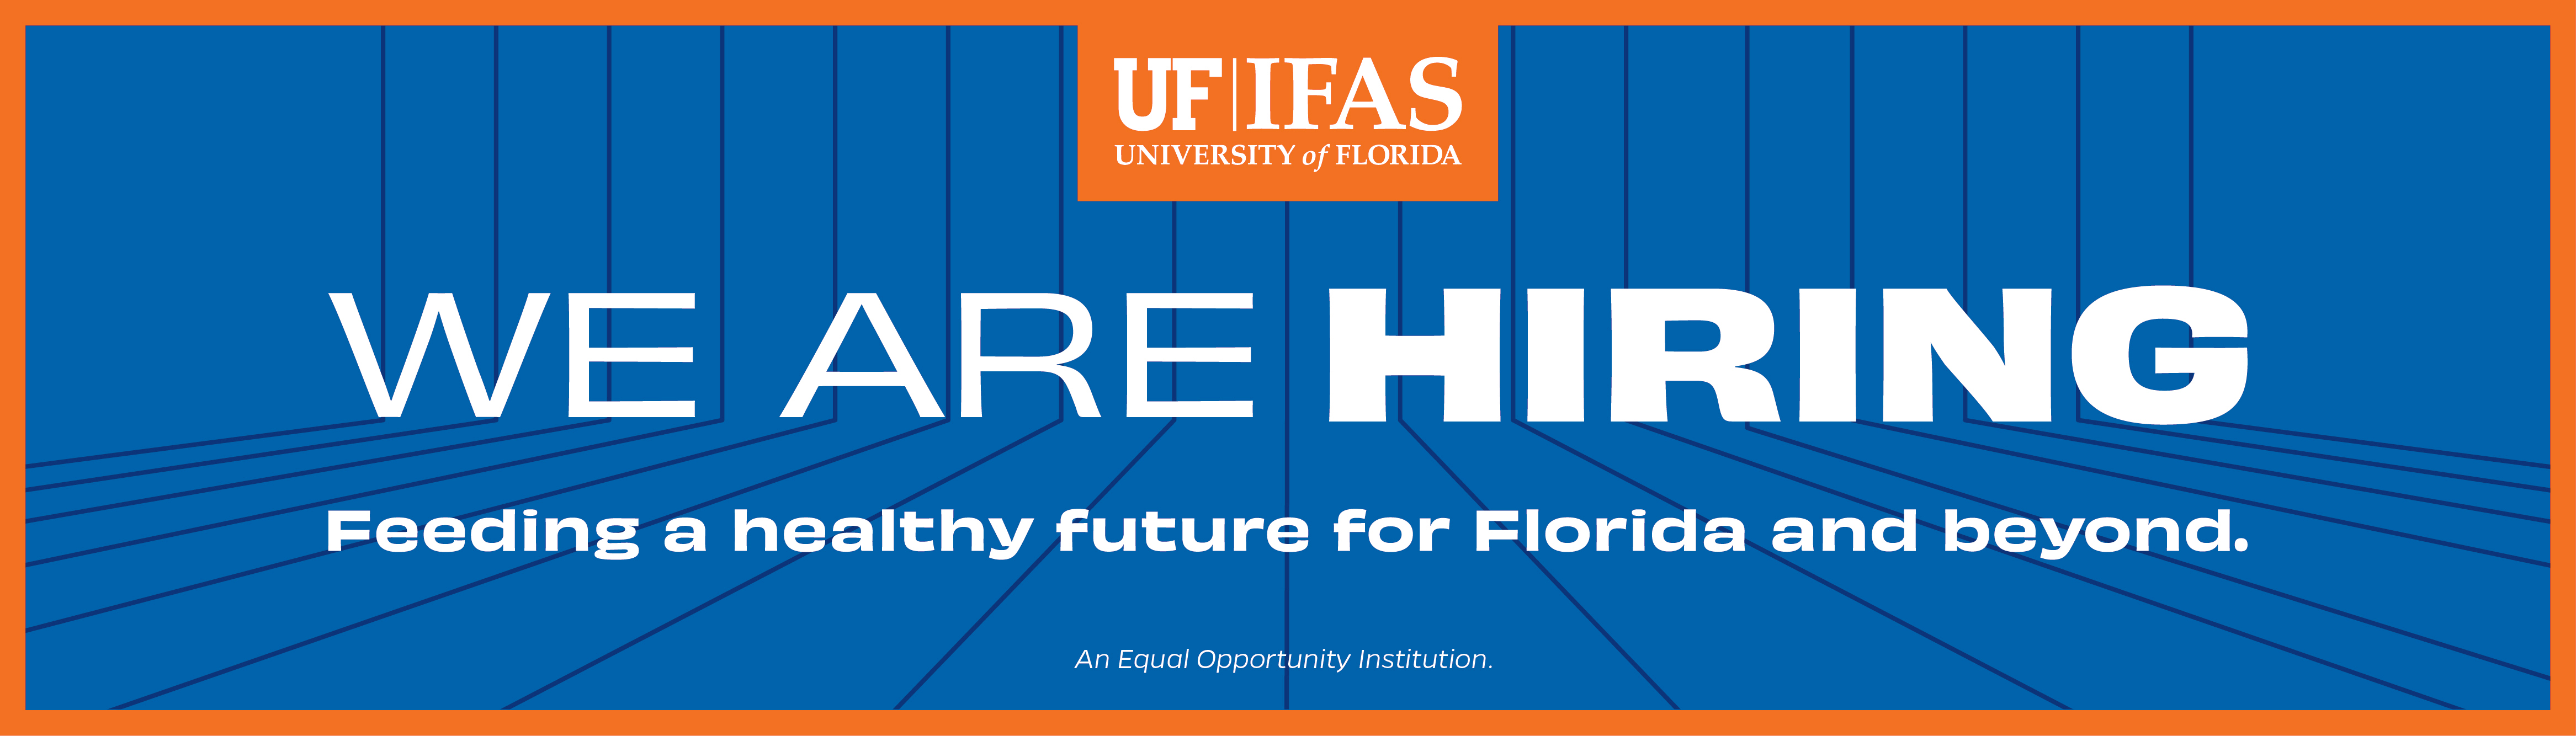 UF IFAS - We are Hiring